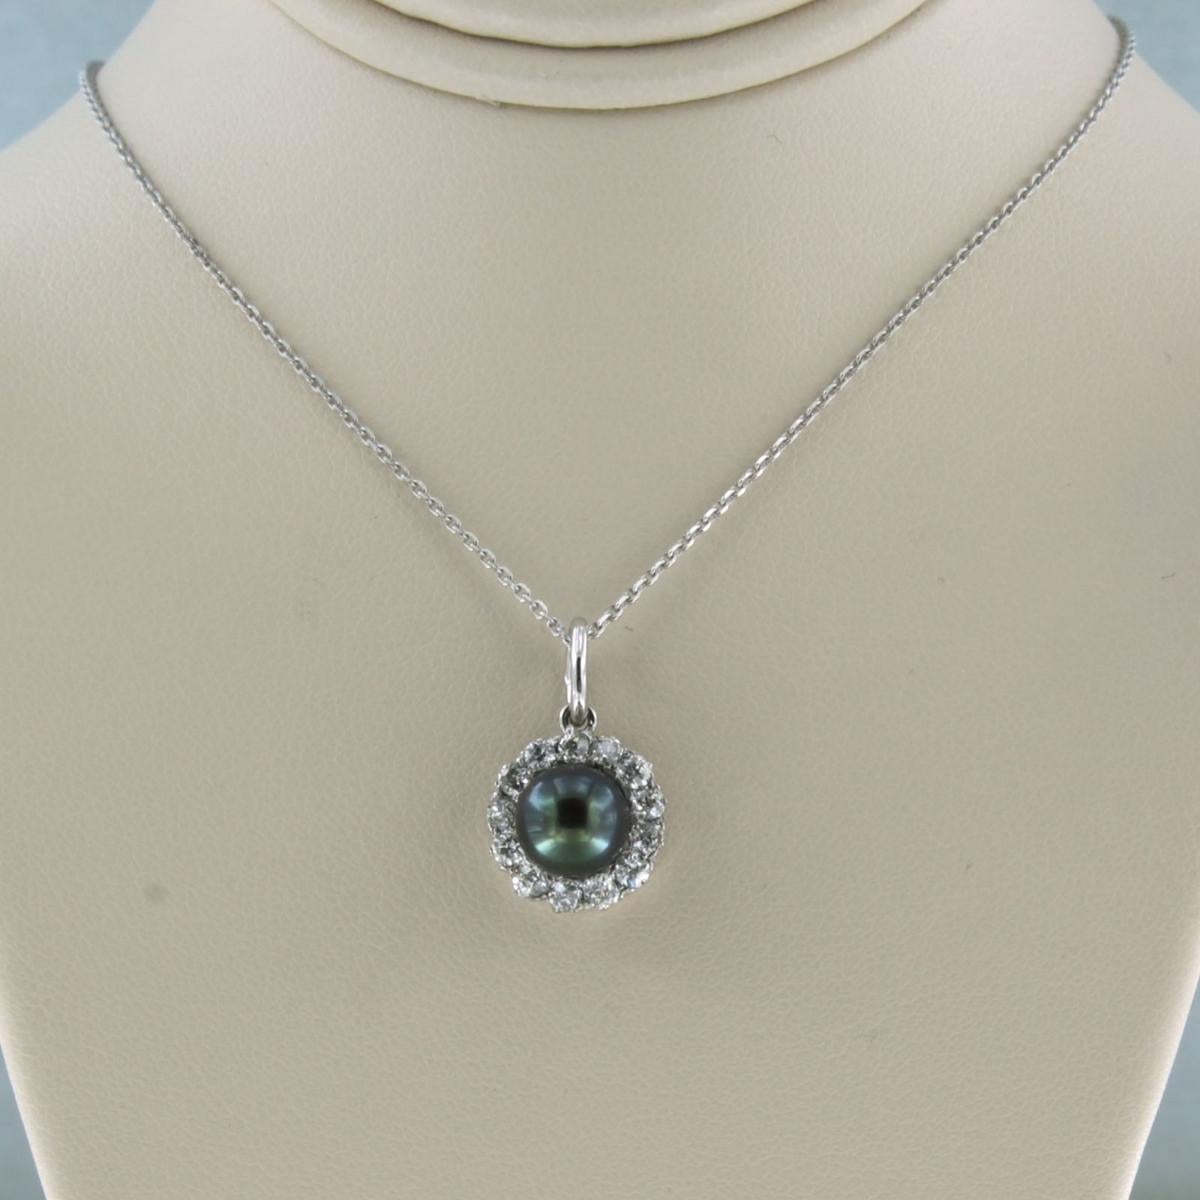 14k white gold necklace with pendant set with pearl and old mine cut diamond. 1.00ct - F/G - VS/SI - 50 cm

detailed description:

the necklace is 50 cm long and 0.7 mm wide.

the pendant is 1.8 cm high and 1.1 cm wide

weight 3.9 grams

set with

-